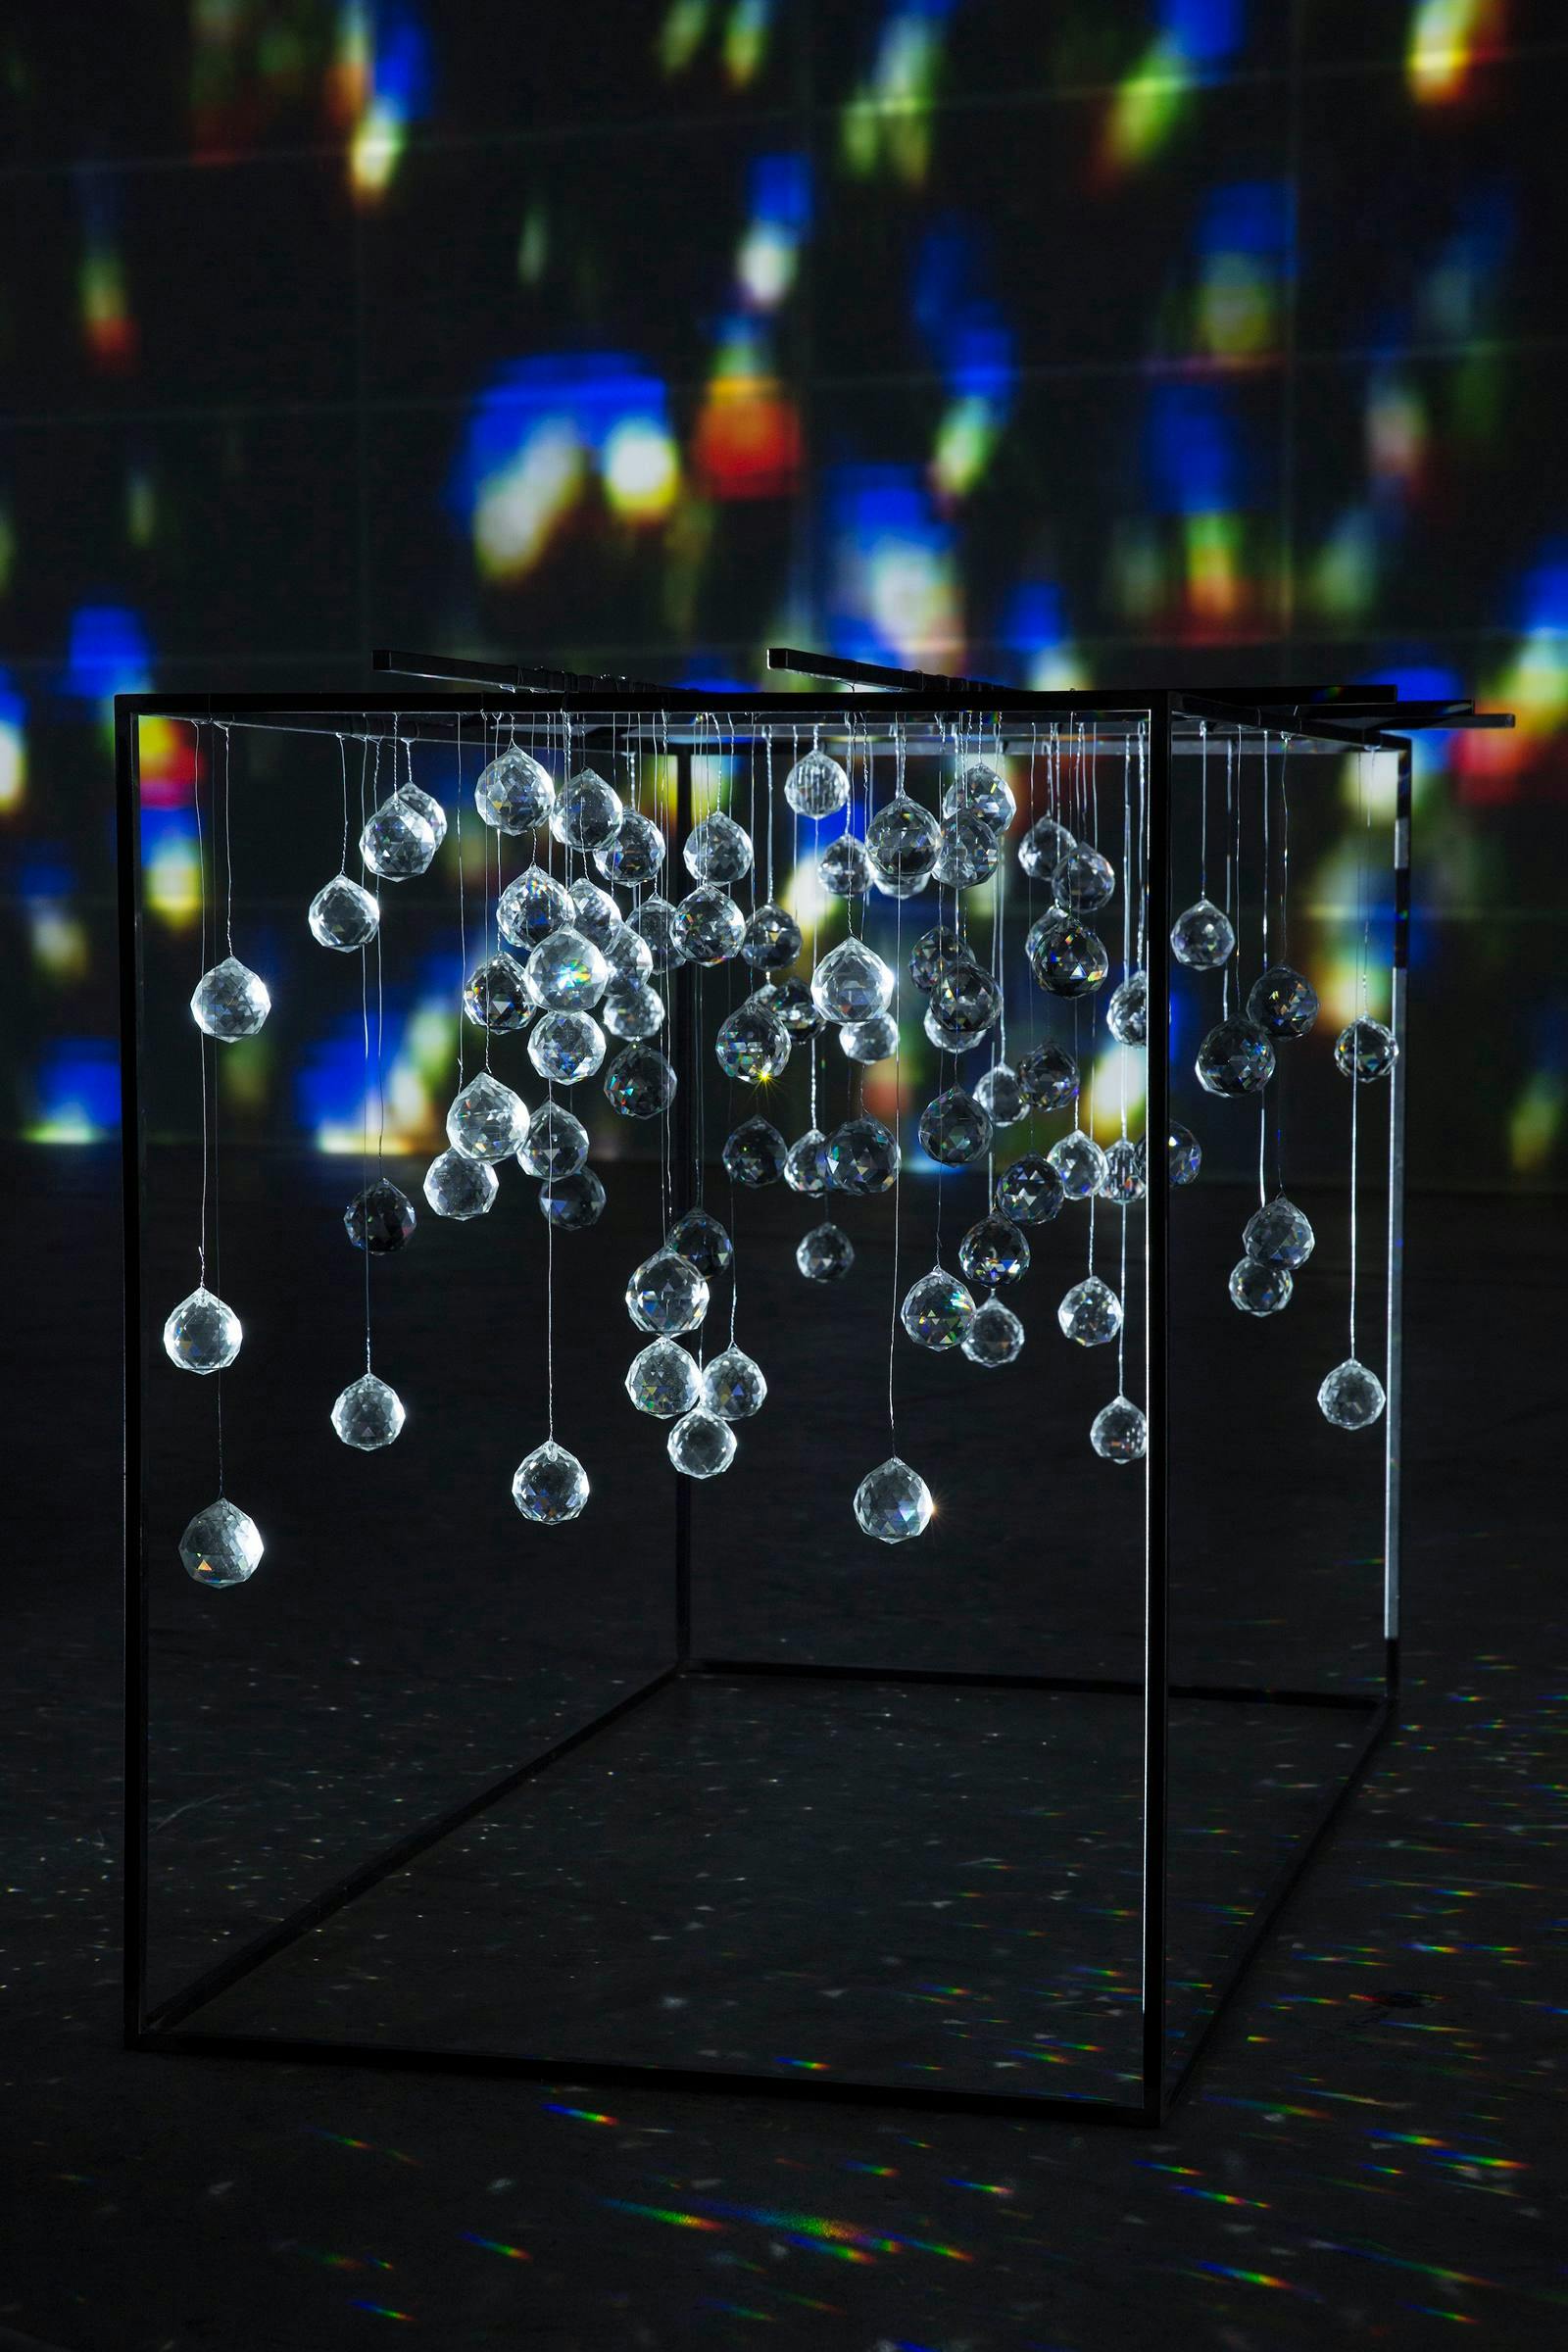 A metal open cube structure with glass spheres hanging from it in sits in a darkened space. The light refraction casts rainbow shadows on the walls